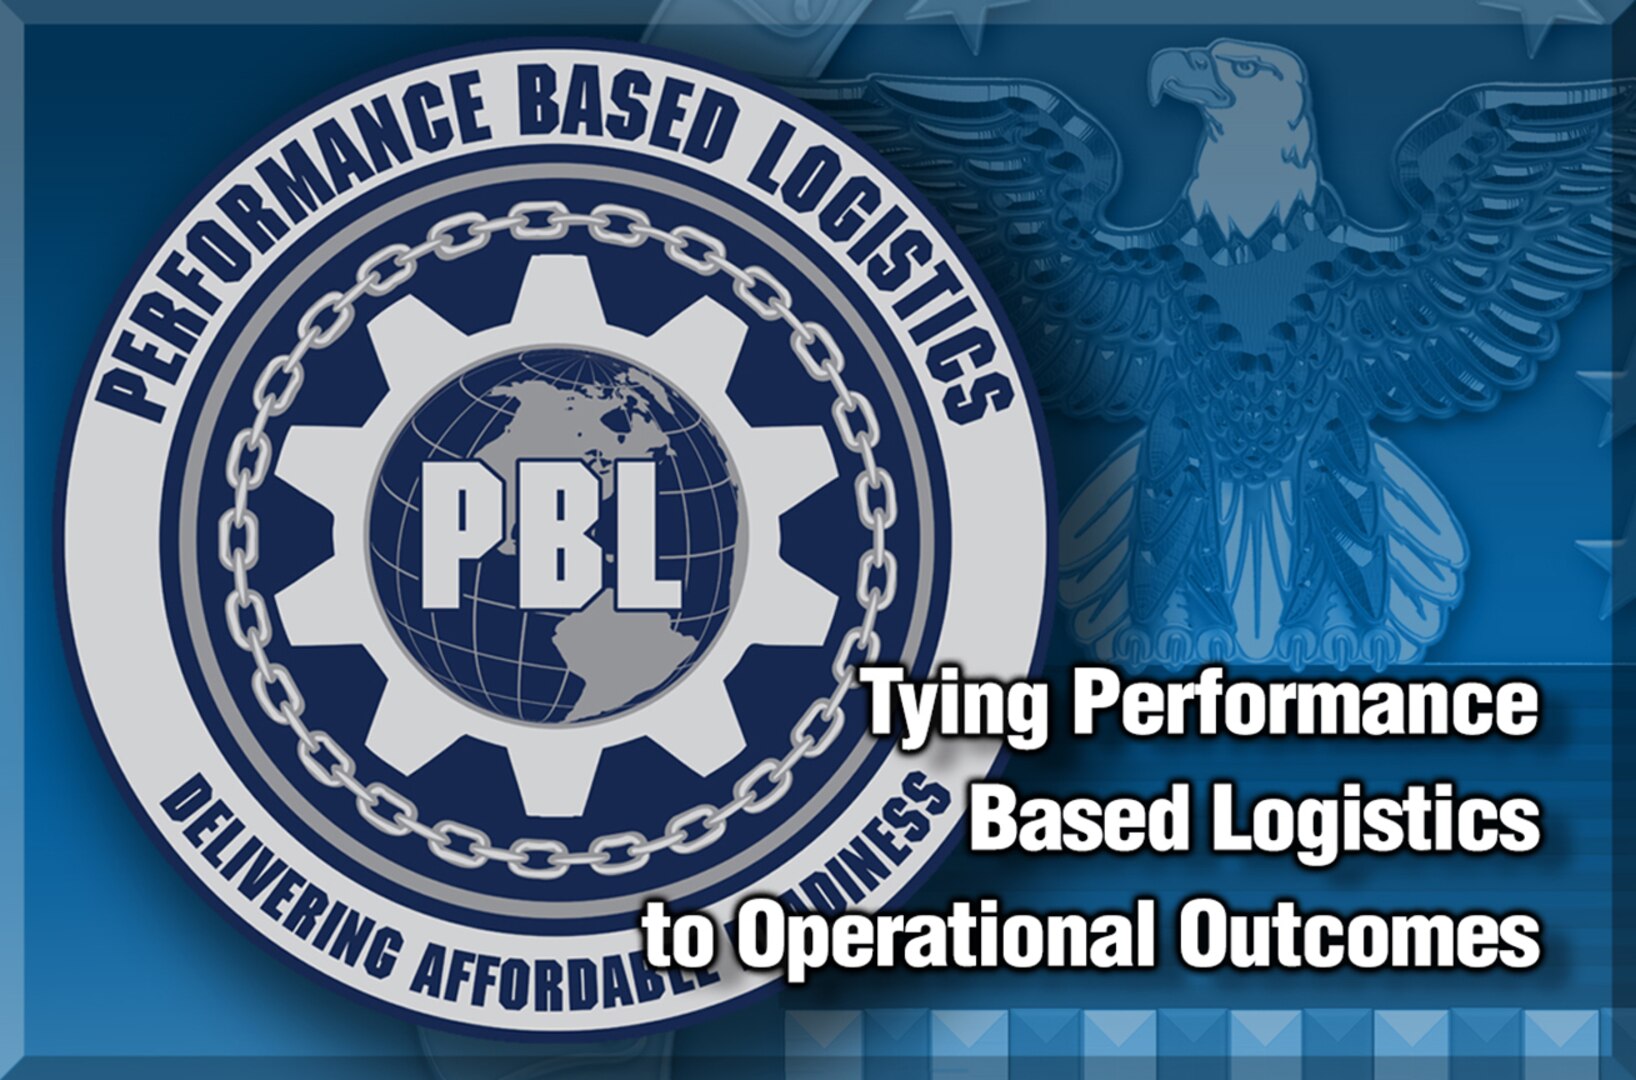 Performance-based logistics was one of several topics Defense Logistics Agency Director Air Force Lt. Gen. Andy Busch emphasized in a Nov. 2 Town Hall with DLA Headquarters employees.